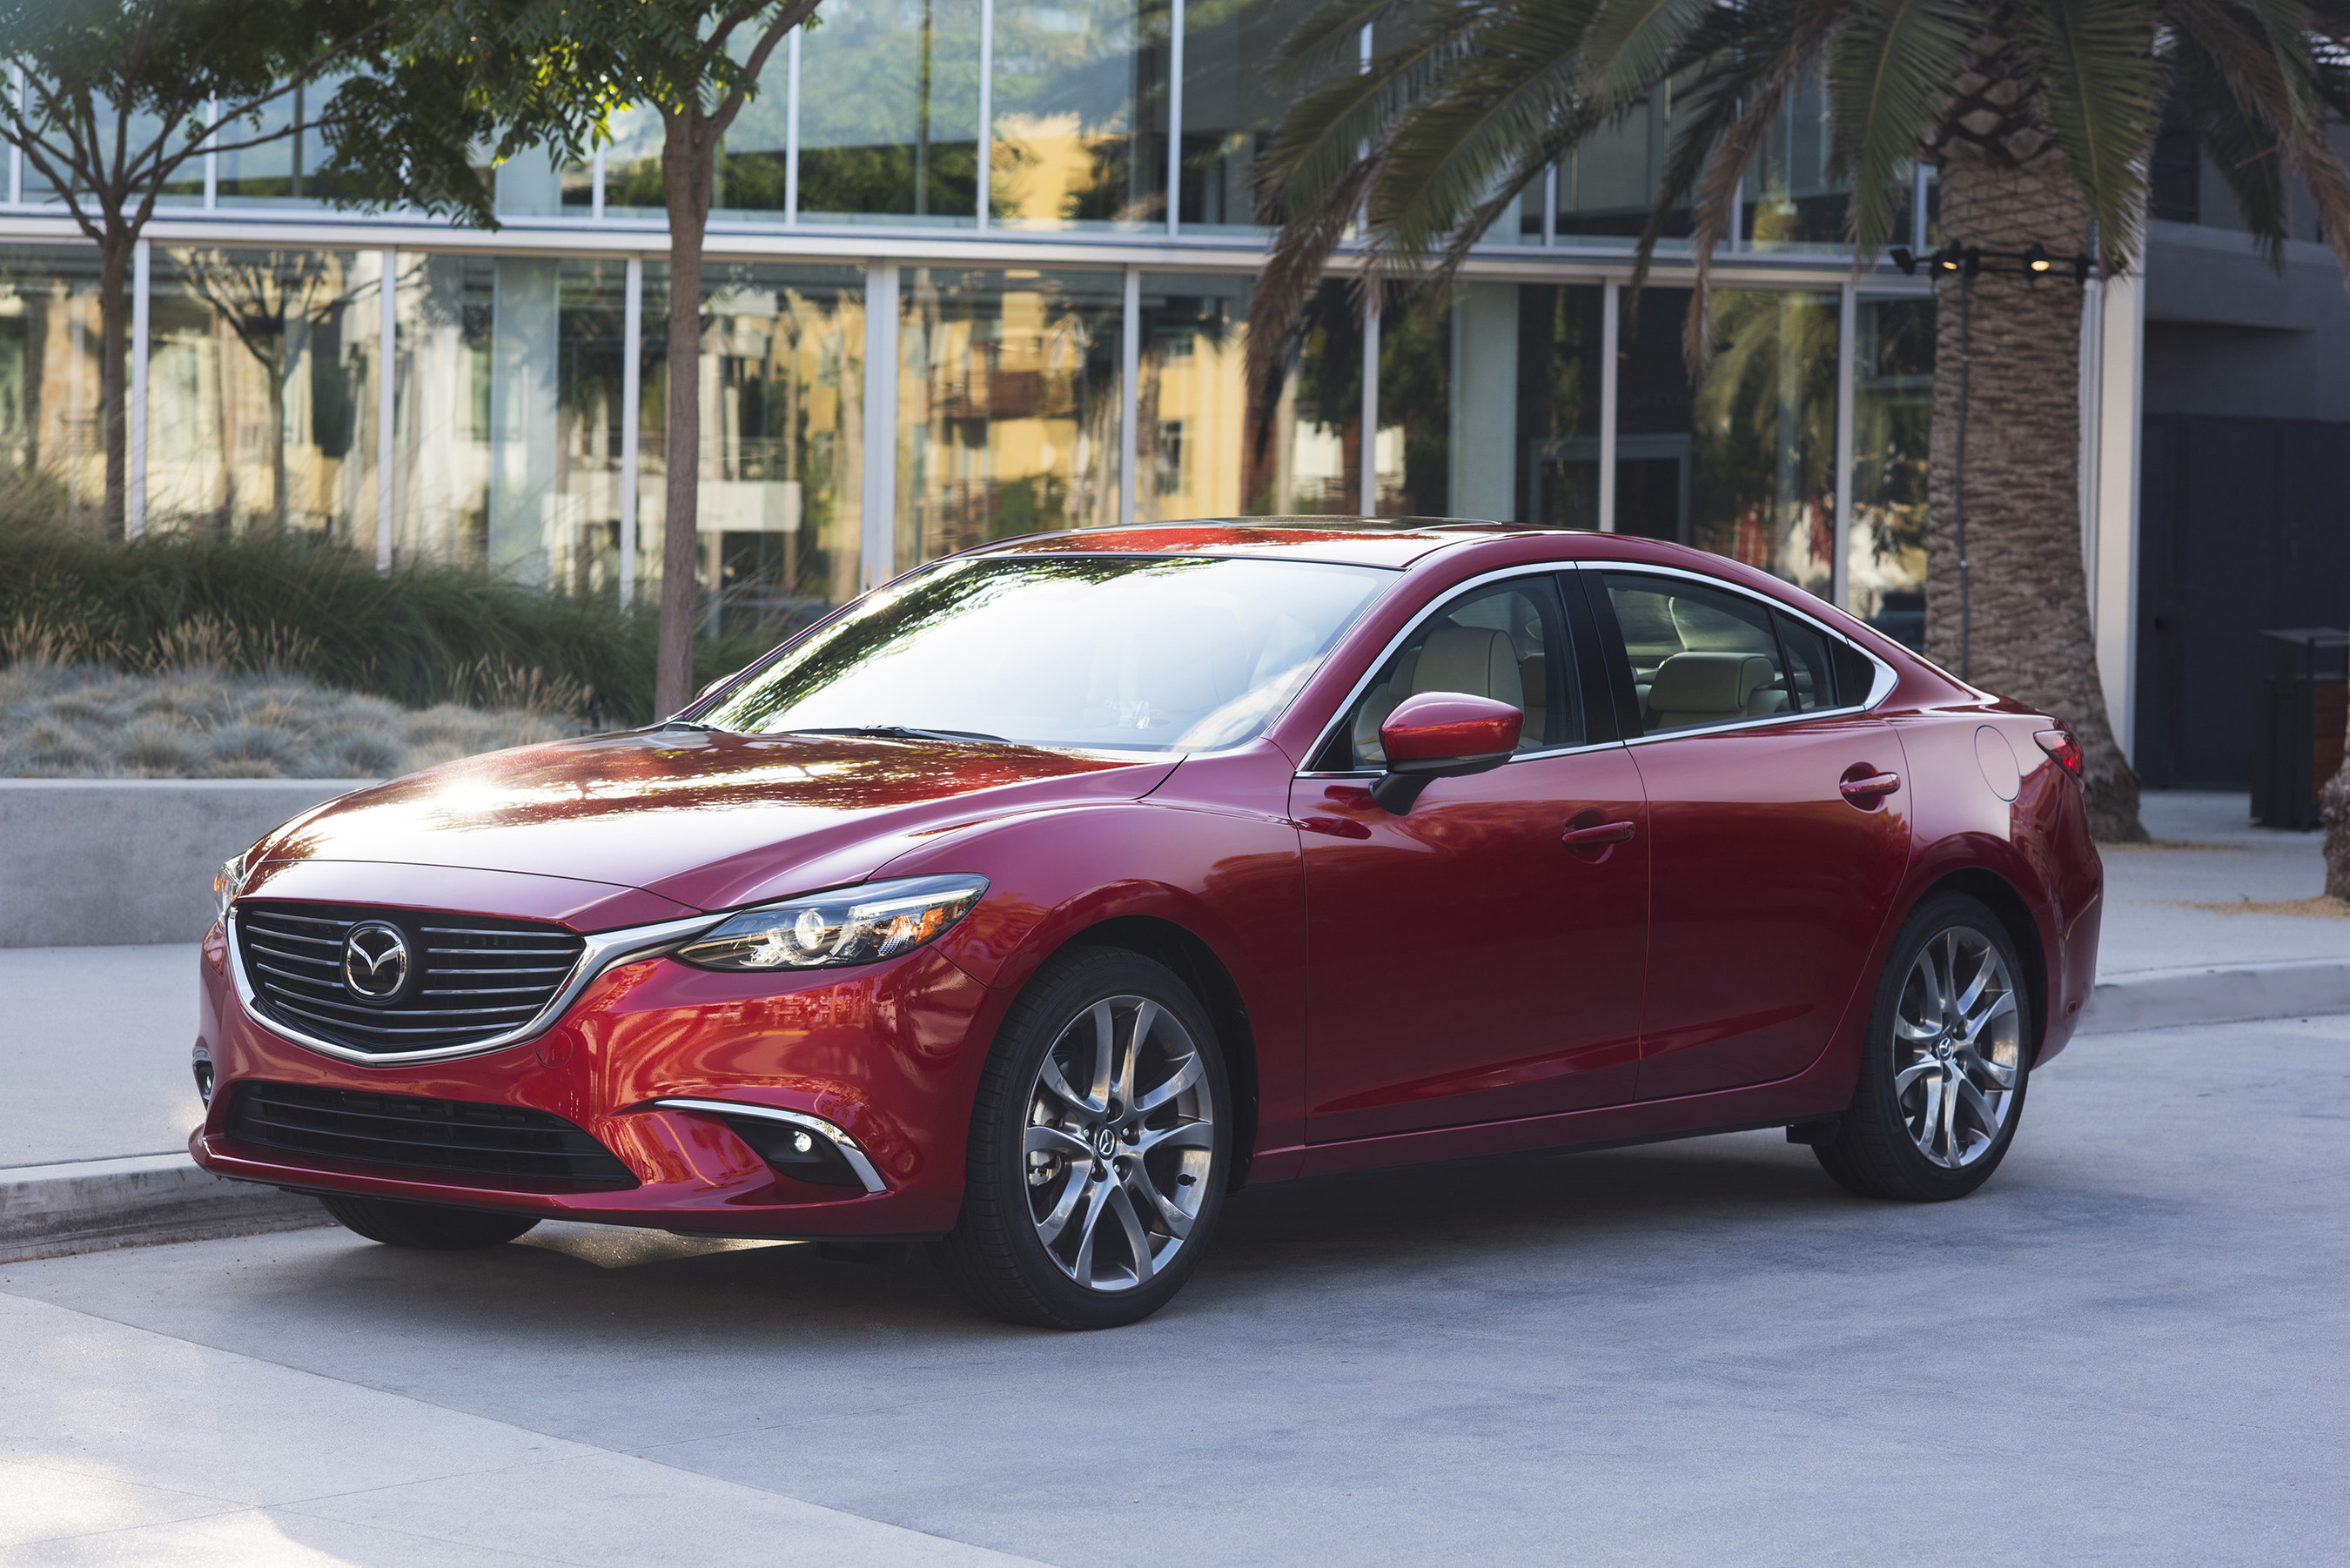 2017 Mazda6 Adds Athleticism and Ambience to Award-Winning Midsize Family Sedan